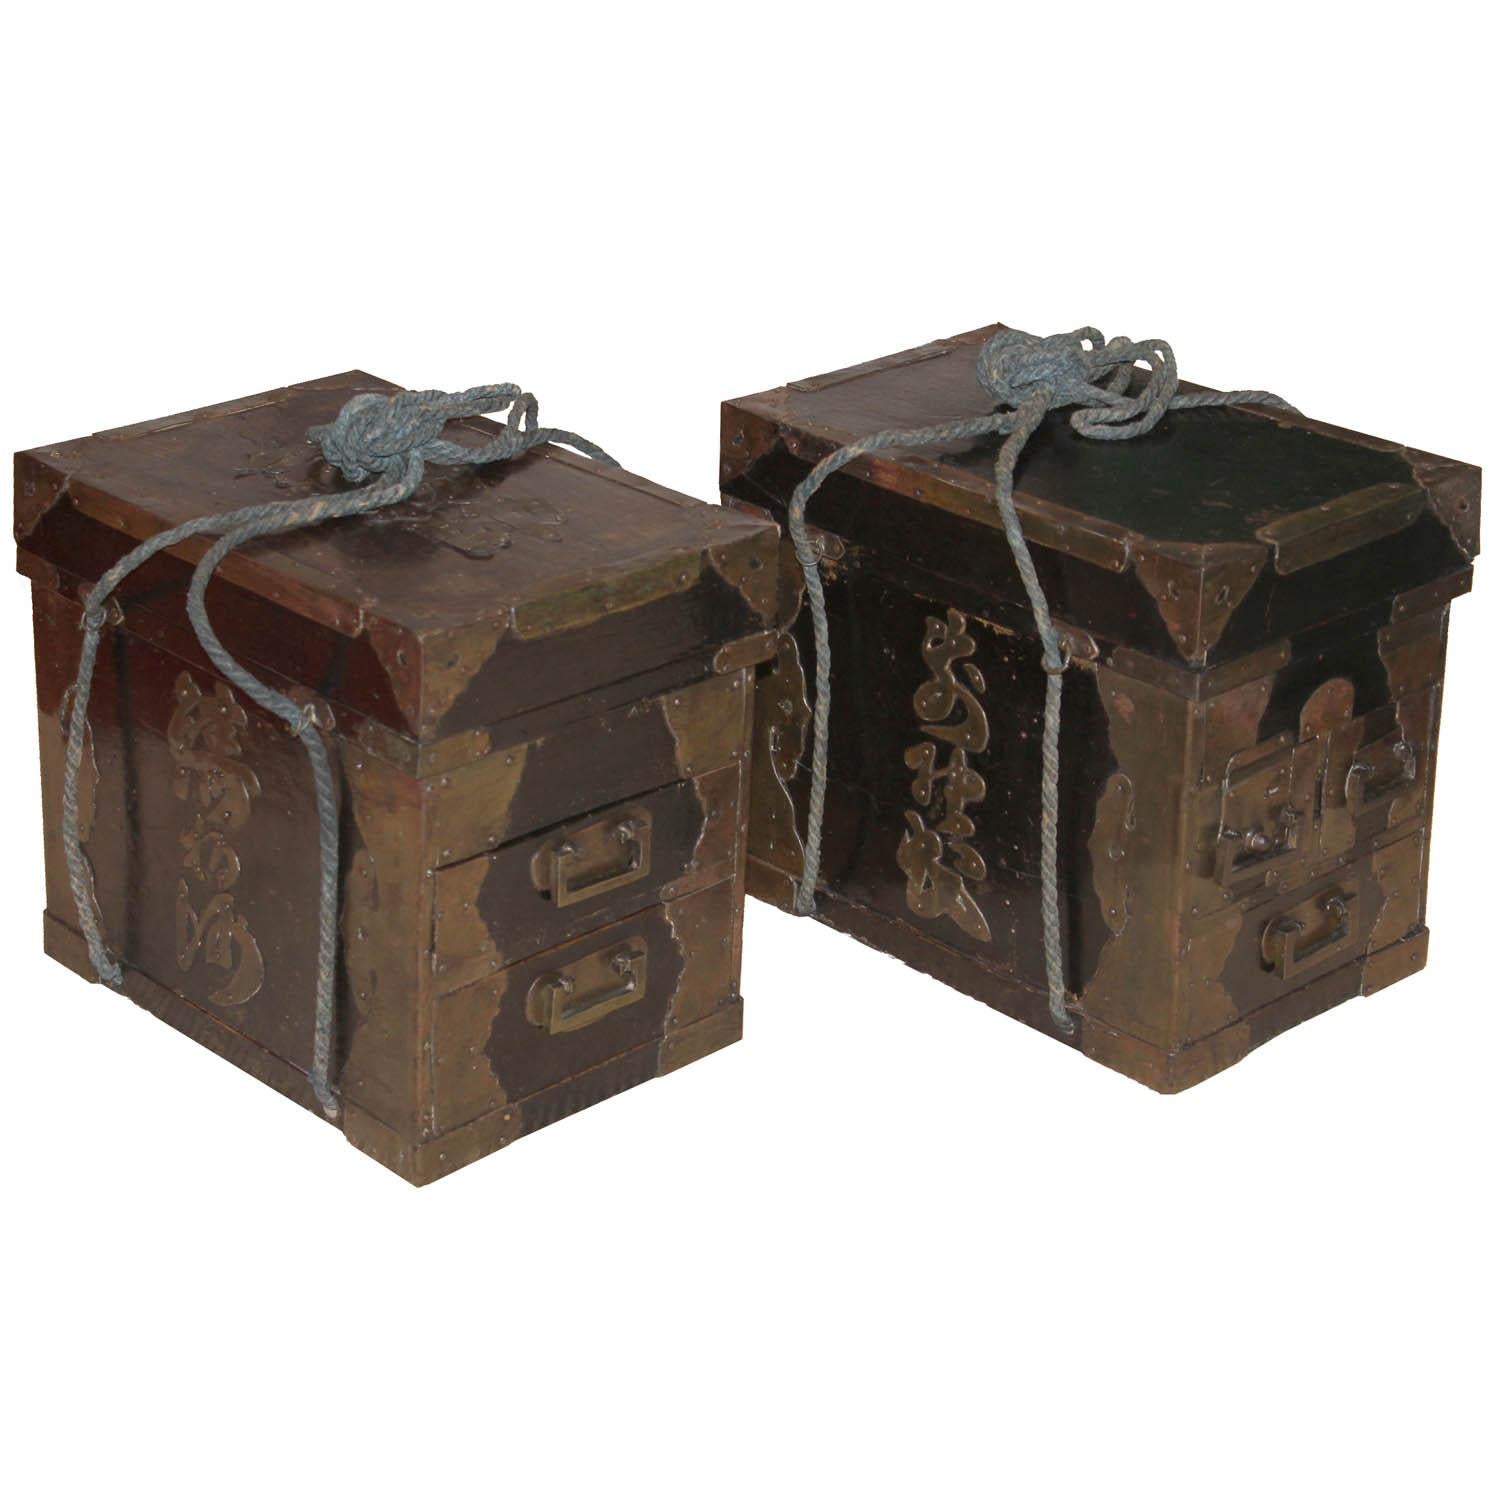 Pair of Japanese black lacquer medicine boxes with copper lettering of the owner, Seinsuke. Medicine salesman would carry the boxes on each end of a pole resting on his shoulders and go door to door selling his wares. Meiji period, circa 1890s.